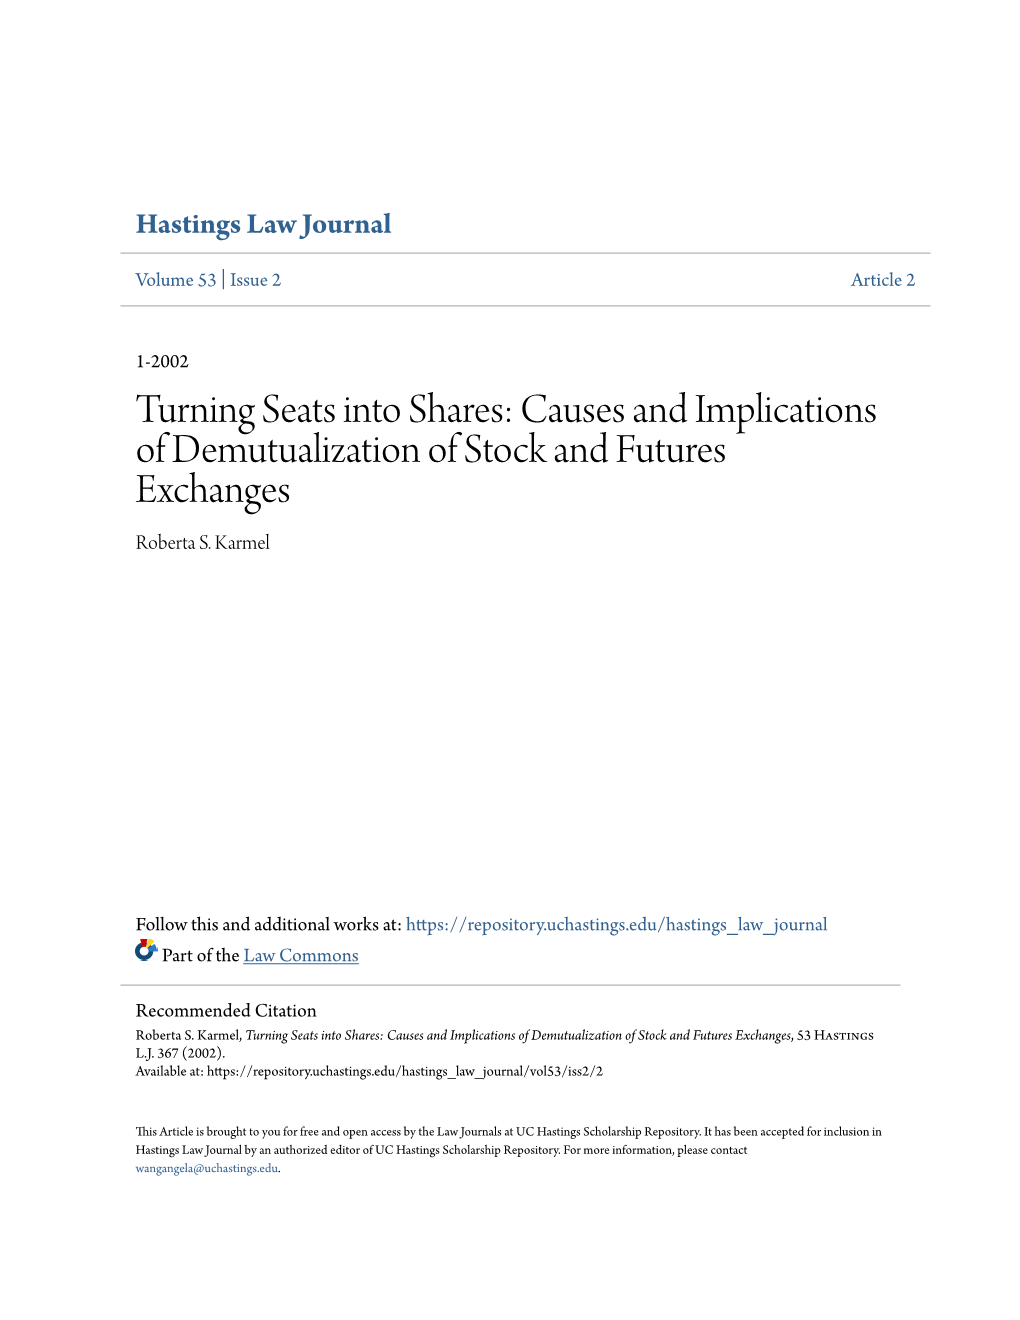 Turning Seats Into Shares: Causes and Implications of Demutualization of Stock and Futures Exchanges Roberta S